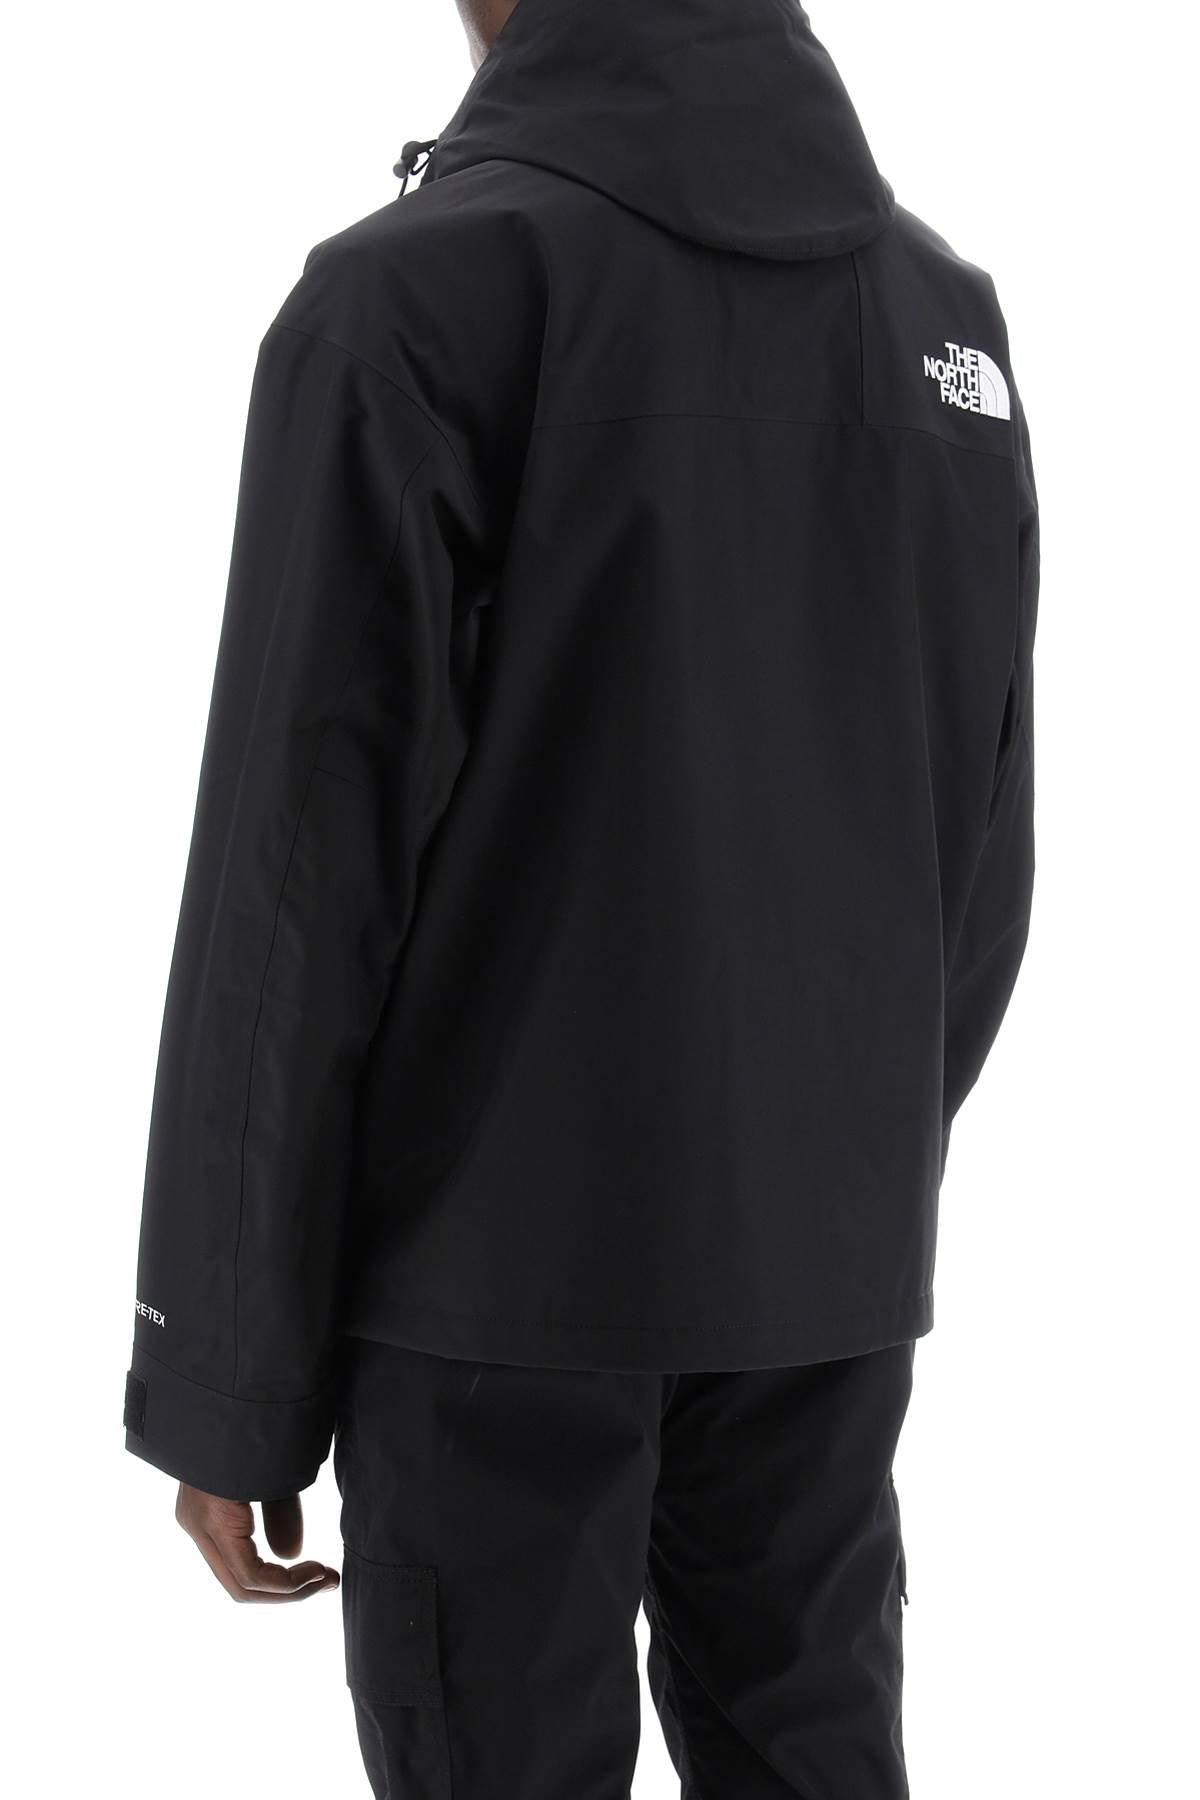 The north face mountain gore-tex jacket-2